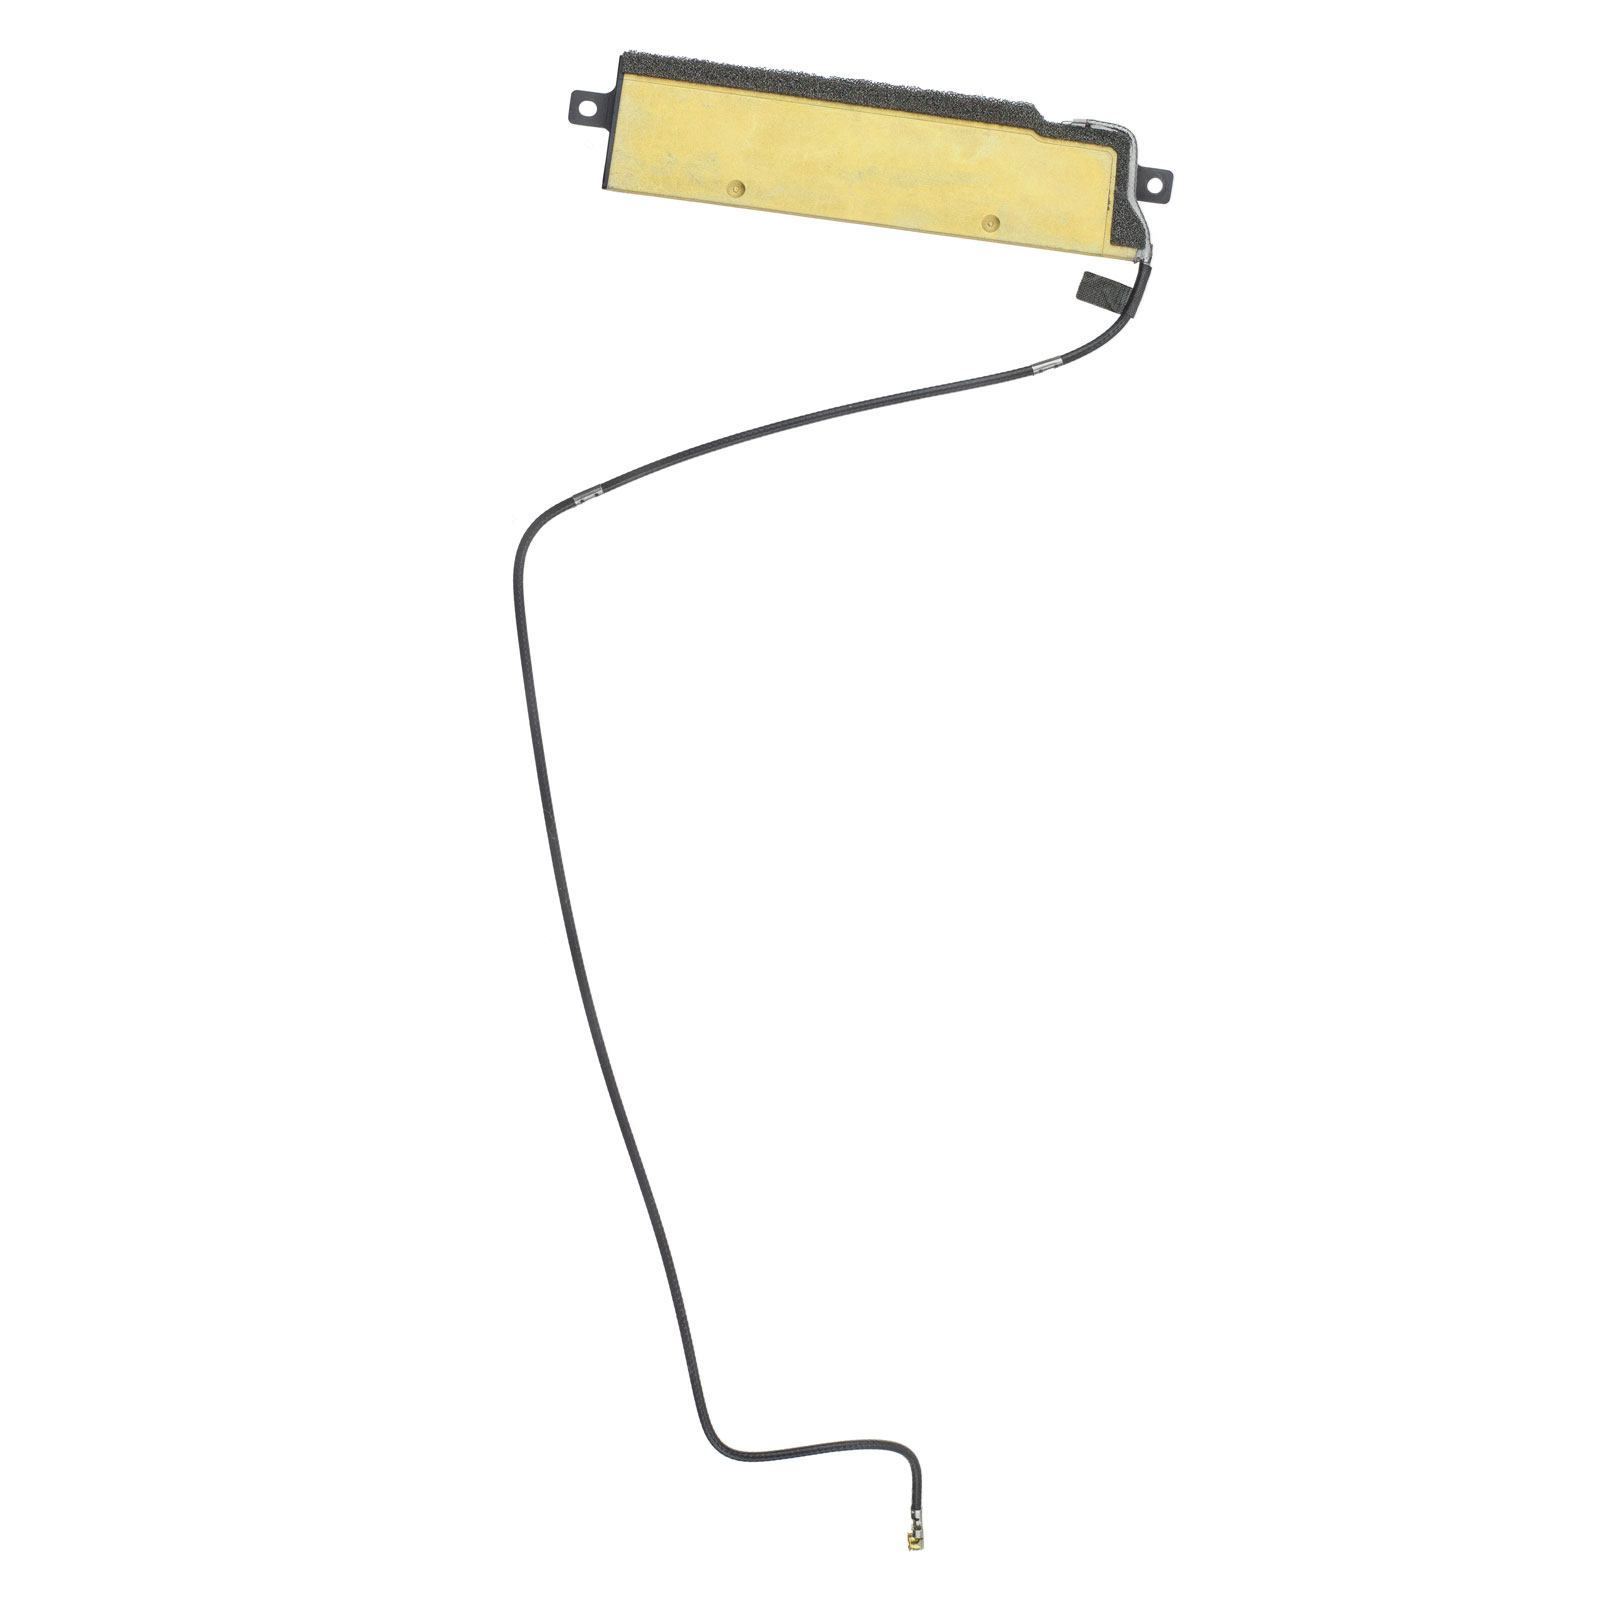 923-0305 WiFi Antenna (Lower) for iMac 27 inch Late 2013 A1419 ME088LL/A, ME089LL/A, MF125LL/A